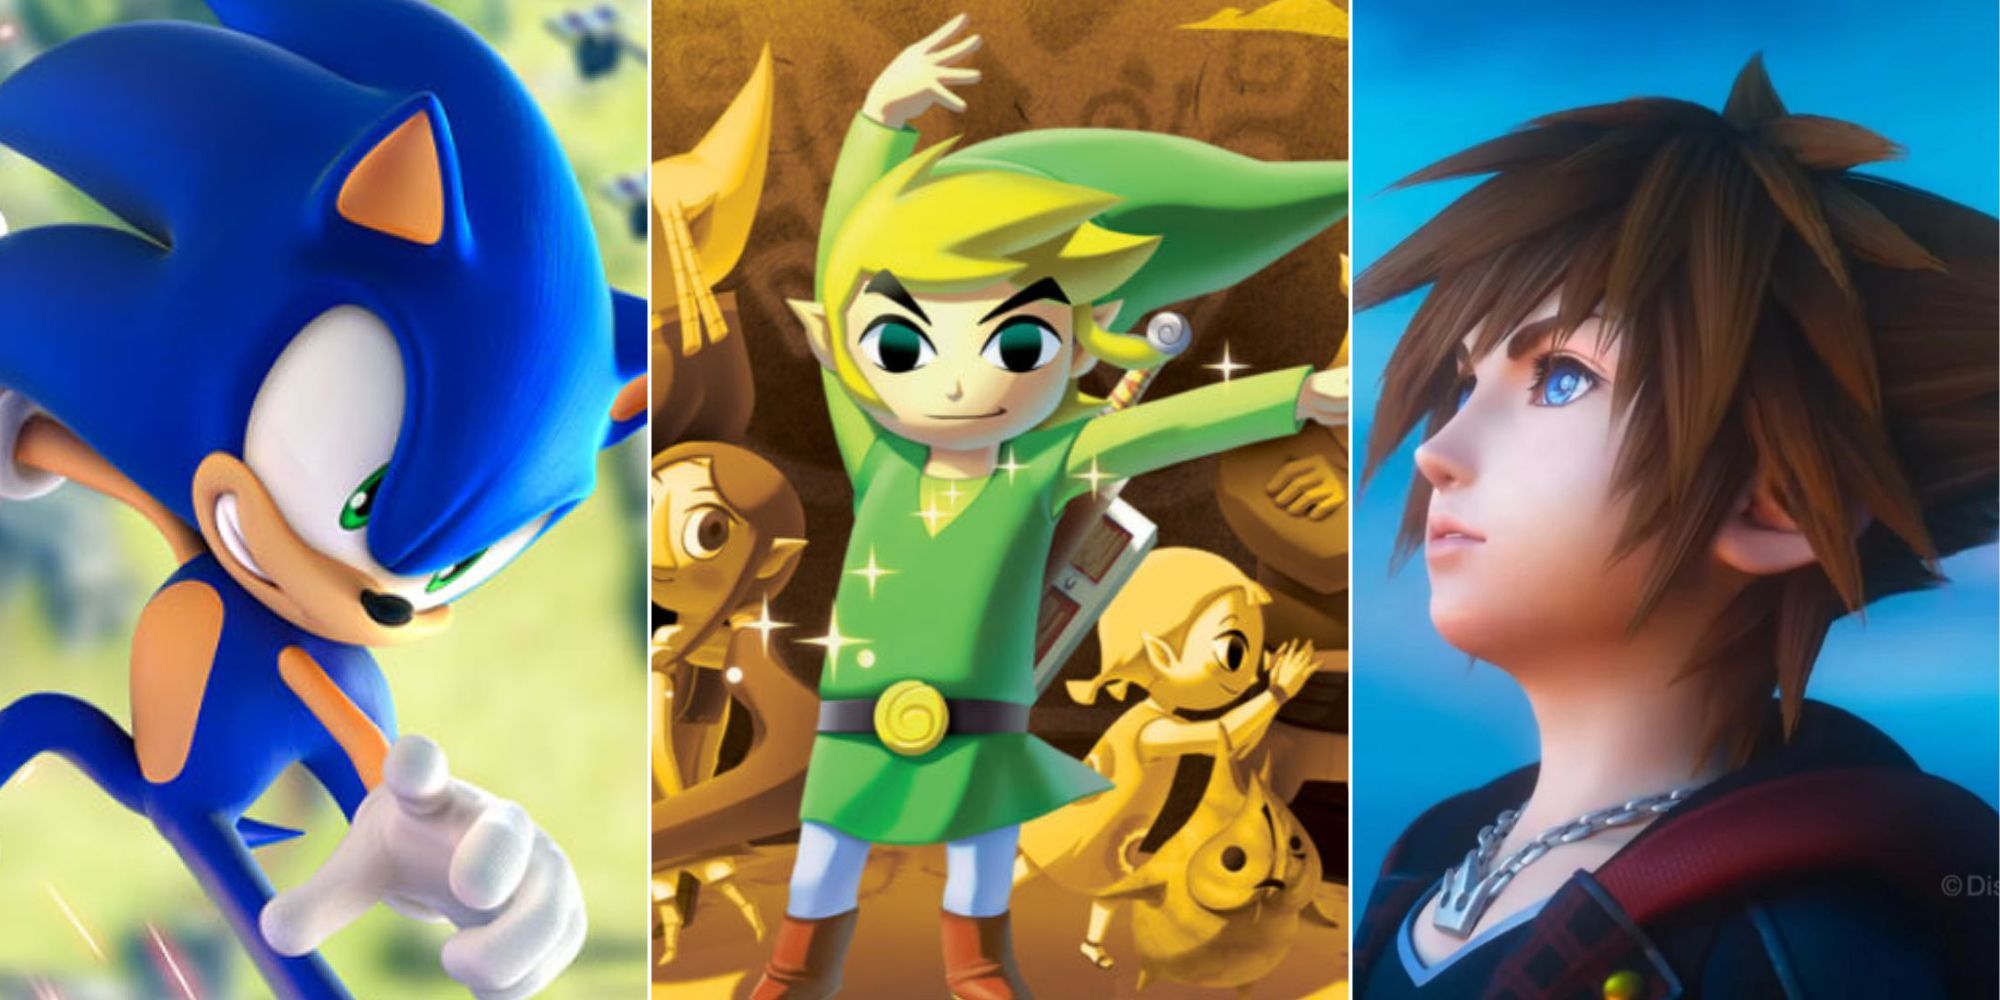 split image of sonic the hedgehog, toon link from wind waker, and sora from kingdom hearts 3